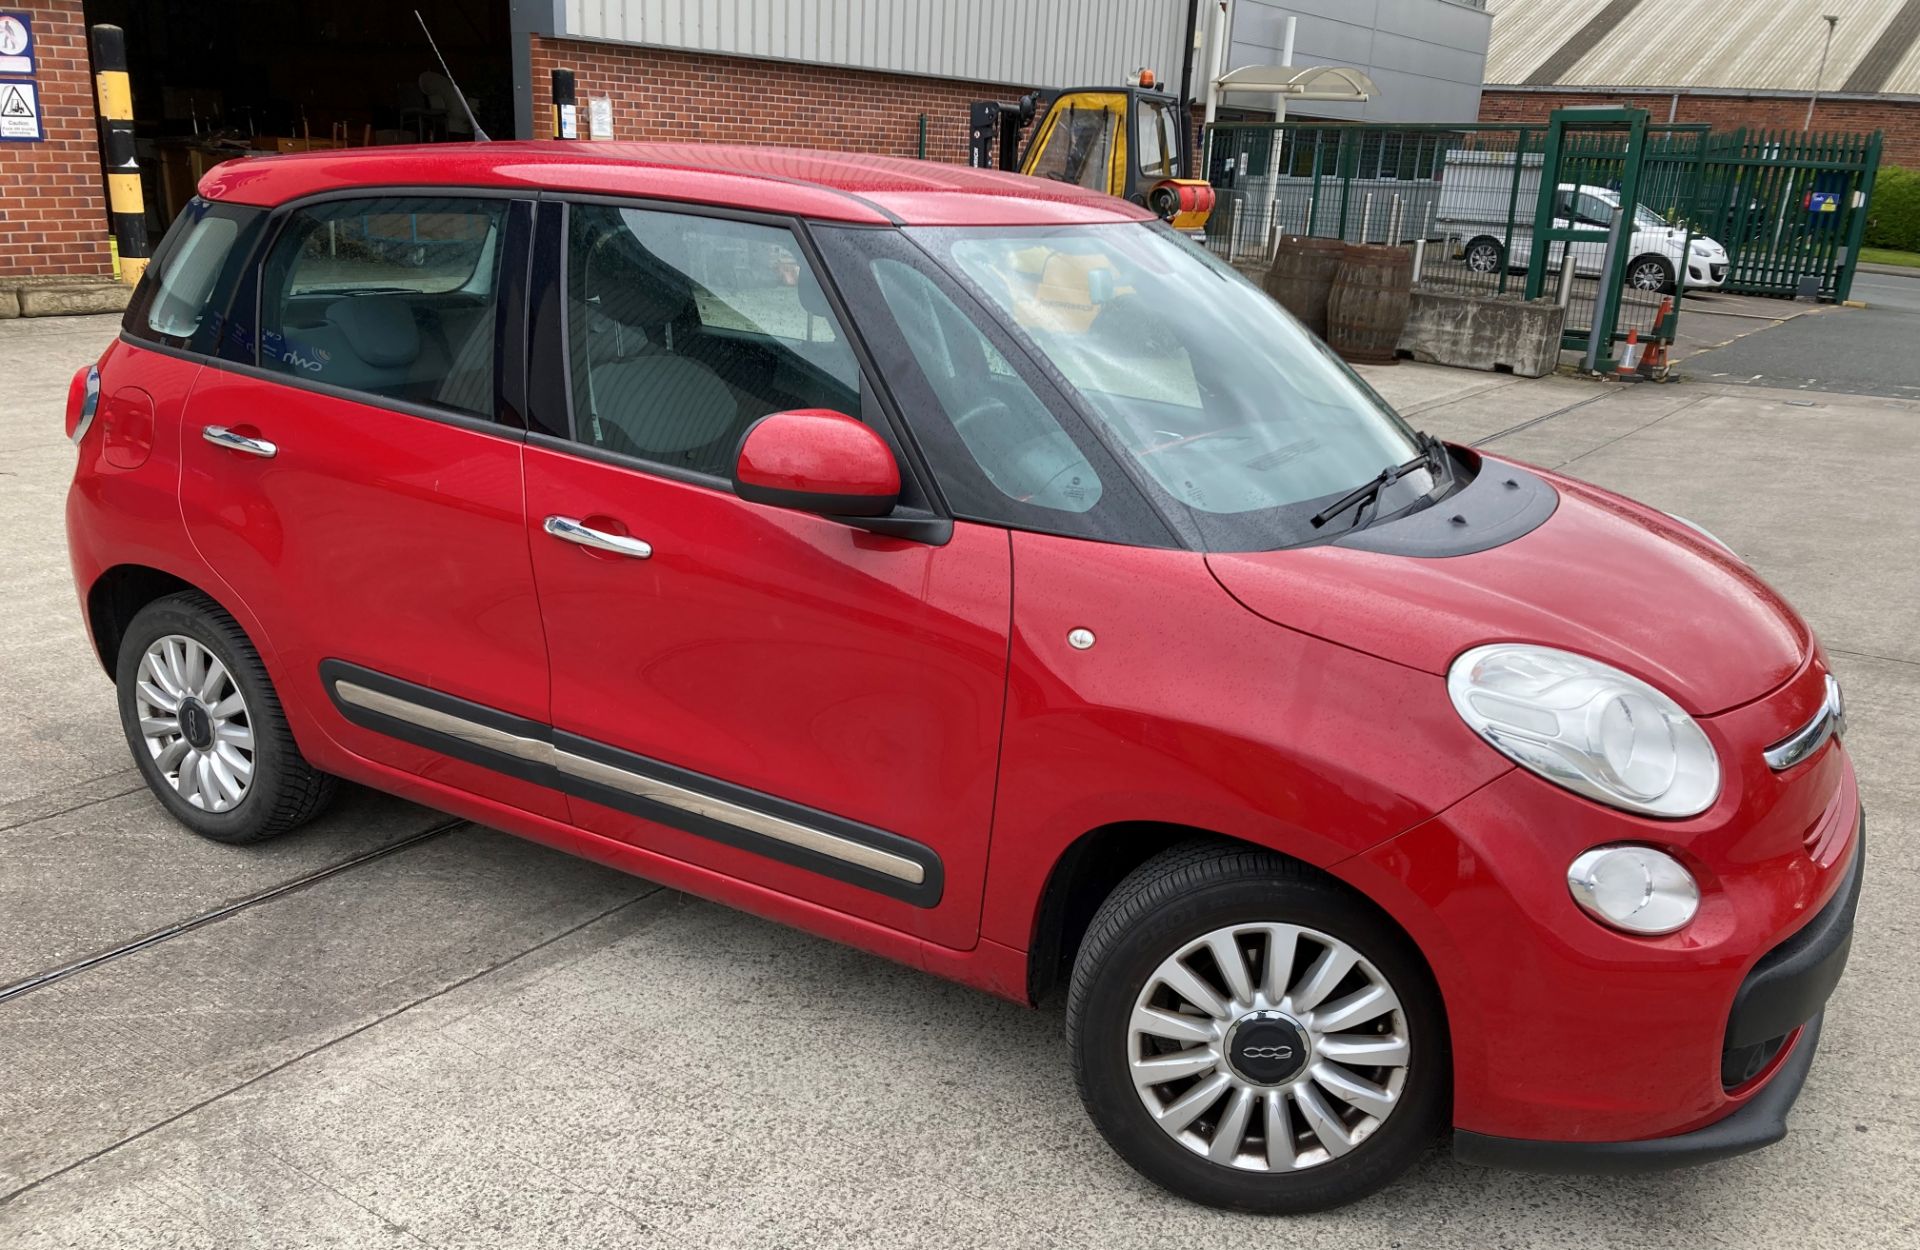 FIAT 500L POP STAR MULTI-JET 1.2 MPV - DIESEL - RED. On the instructions of: A retained client. - Bild 3 aus 16